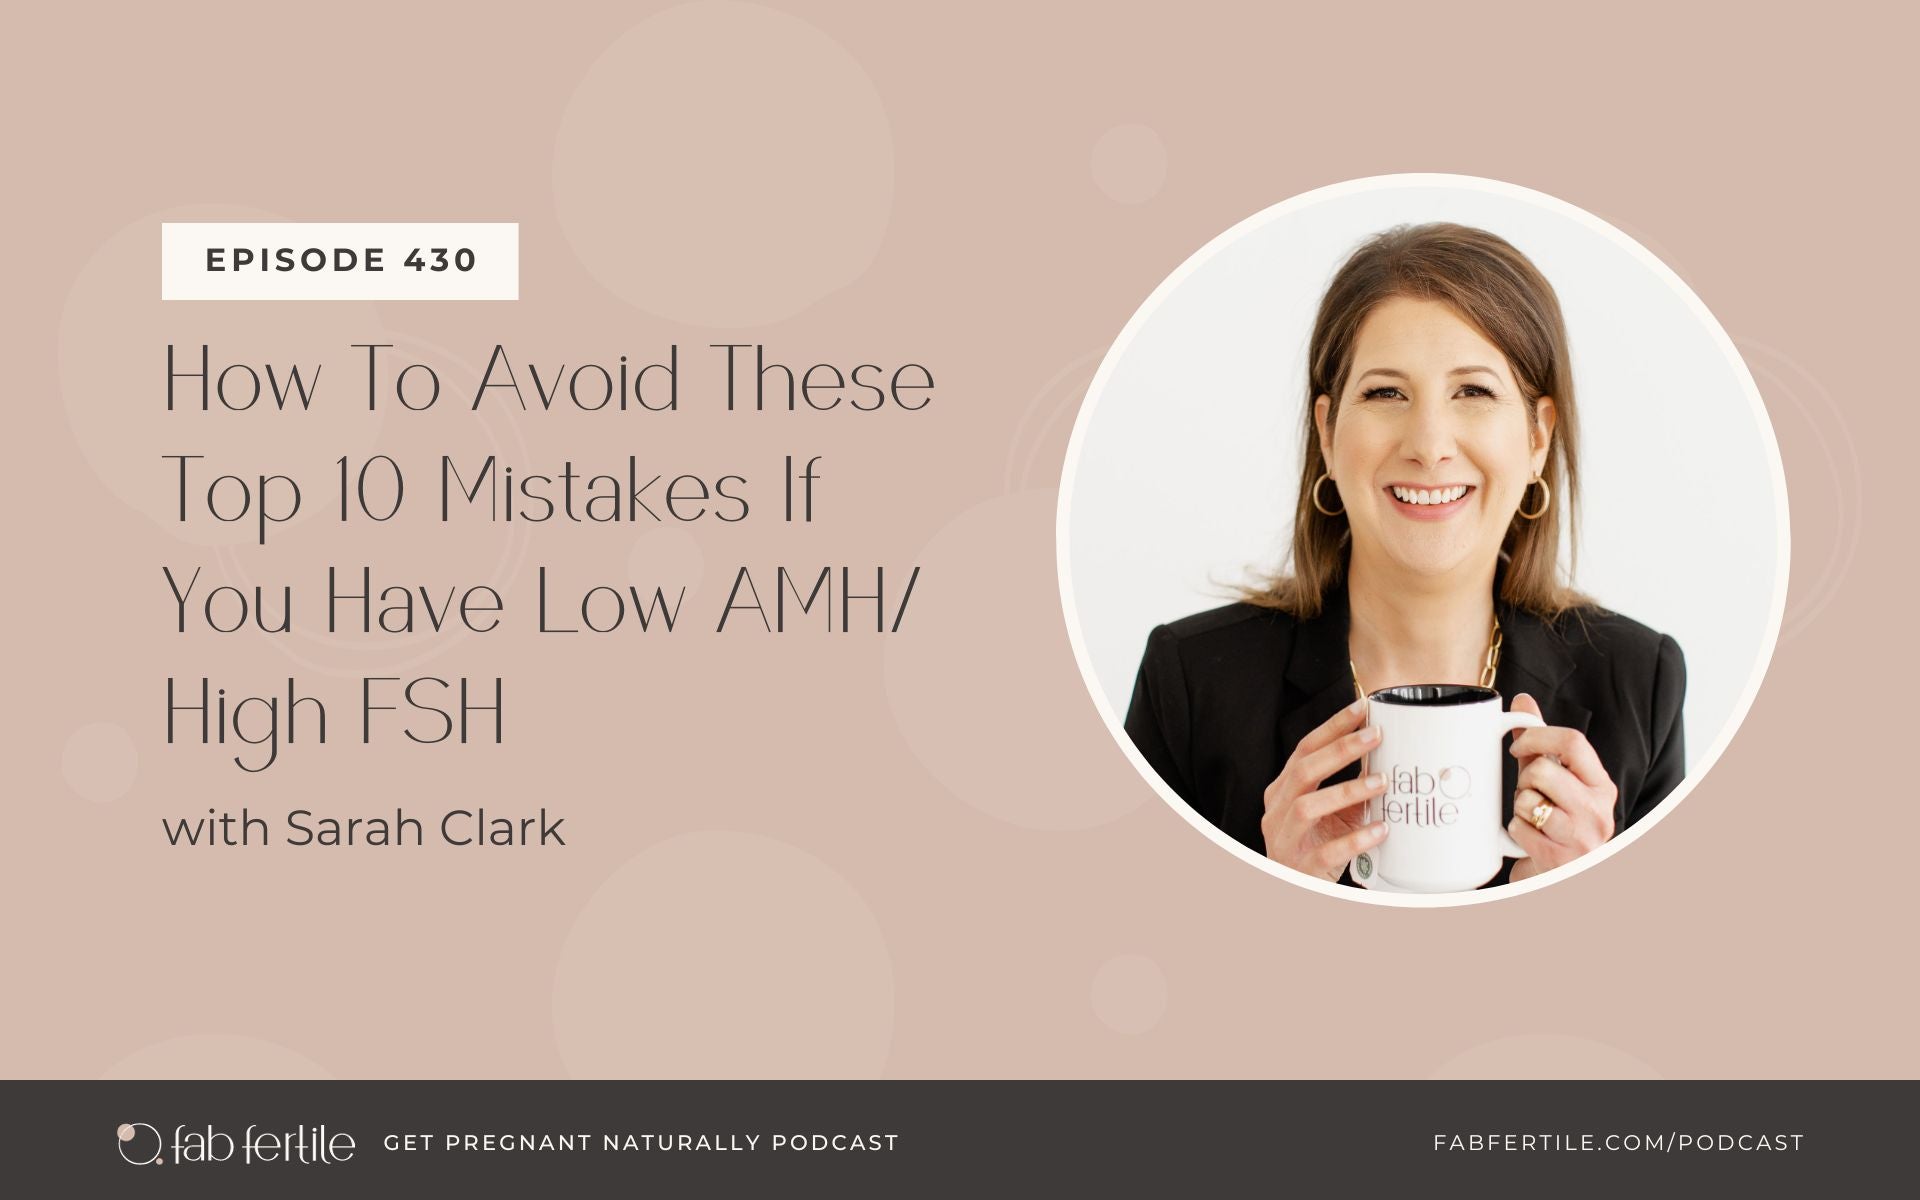 How To Avoid These Top 10 Mistakes If You Have Low AMH/High FSH